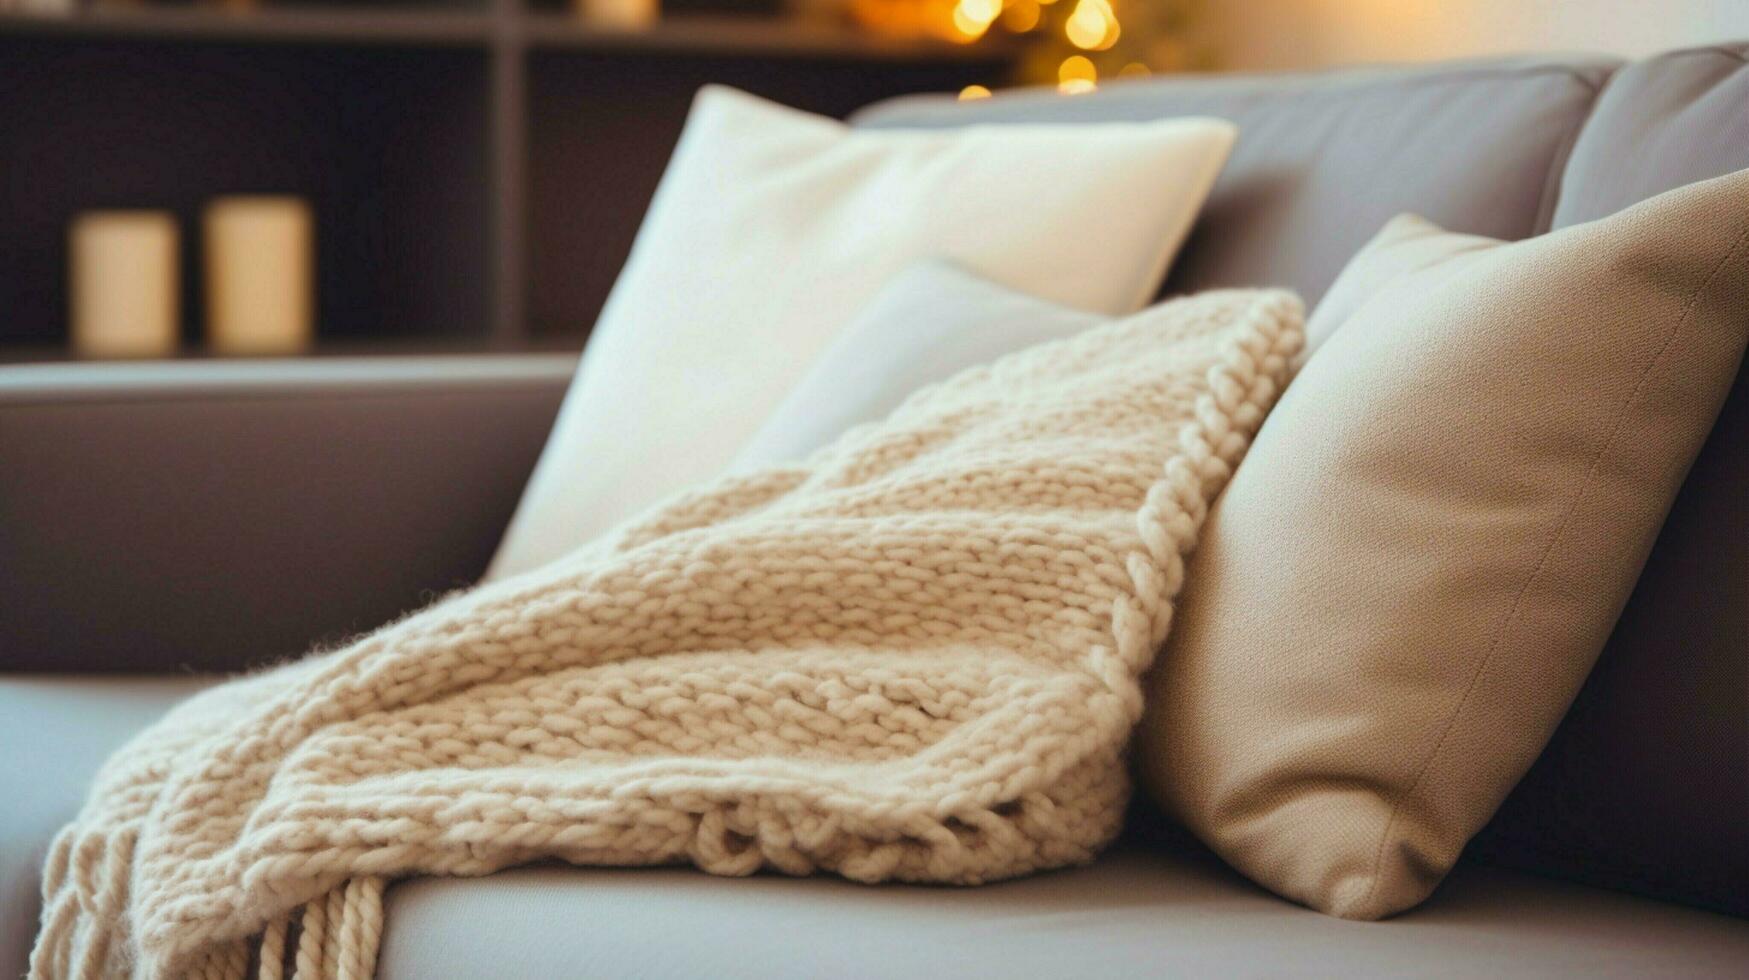 cozy wool blanket on sofa hand holding pillow for relaxation photo